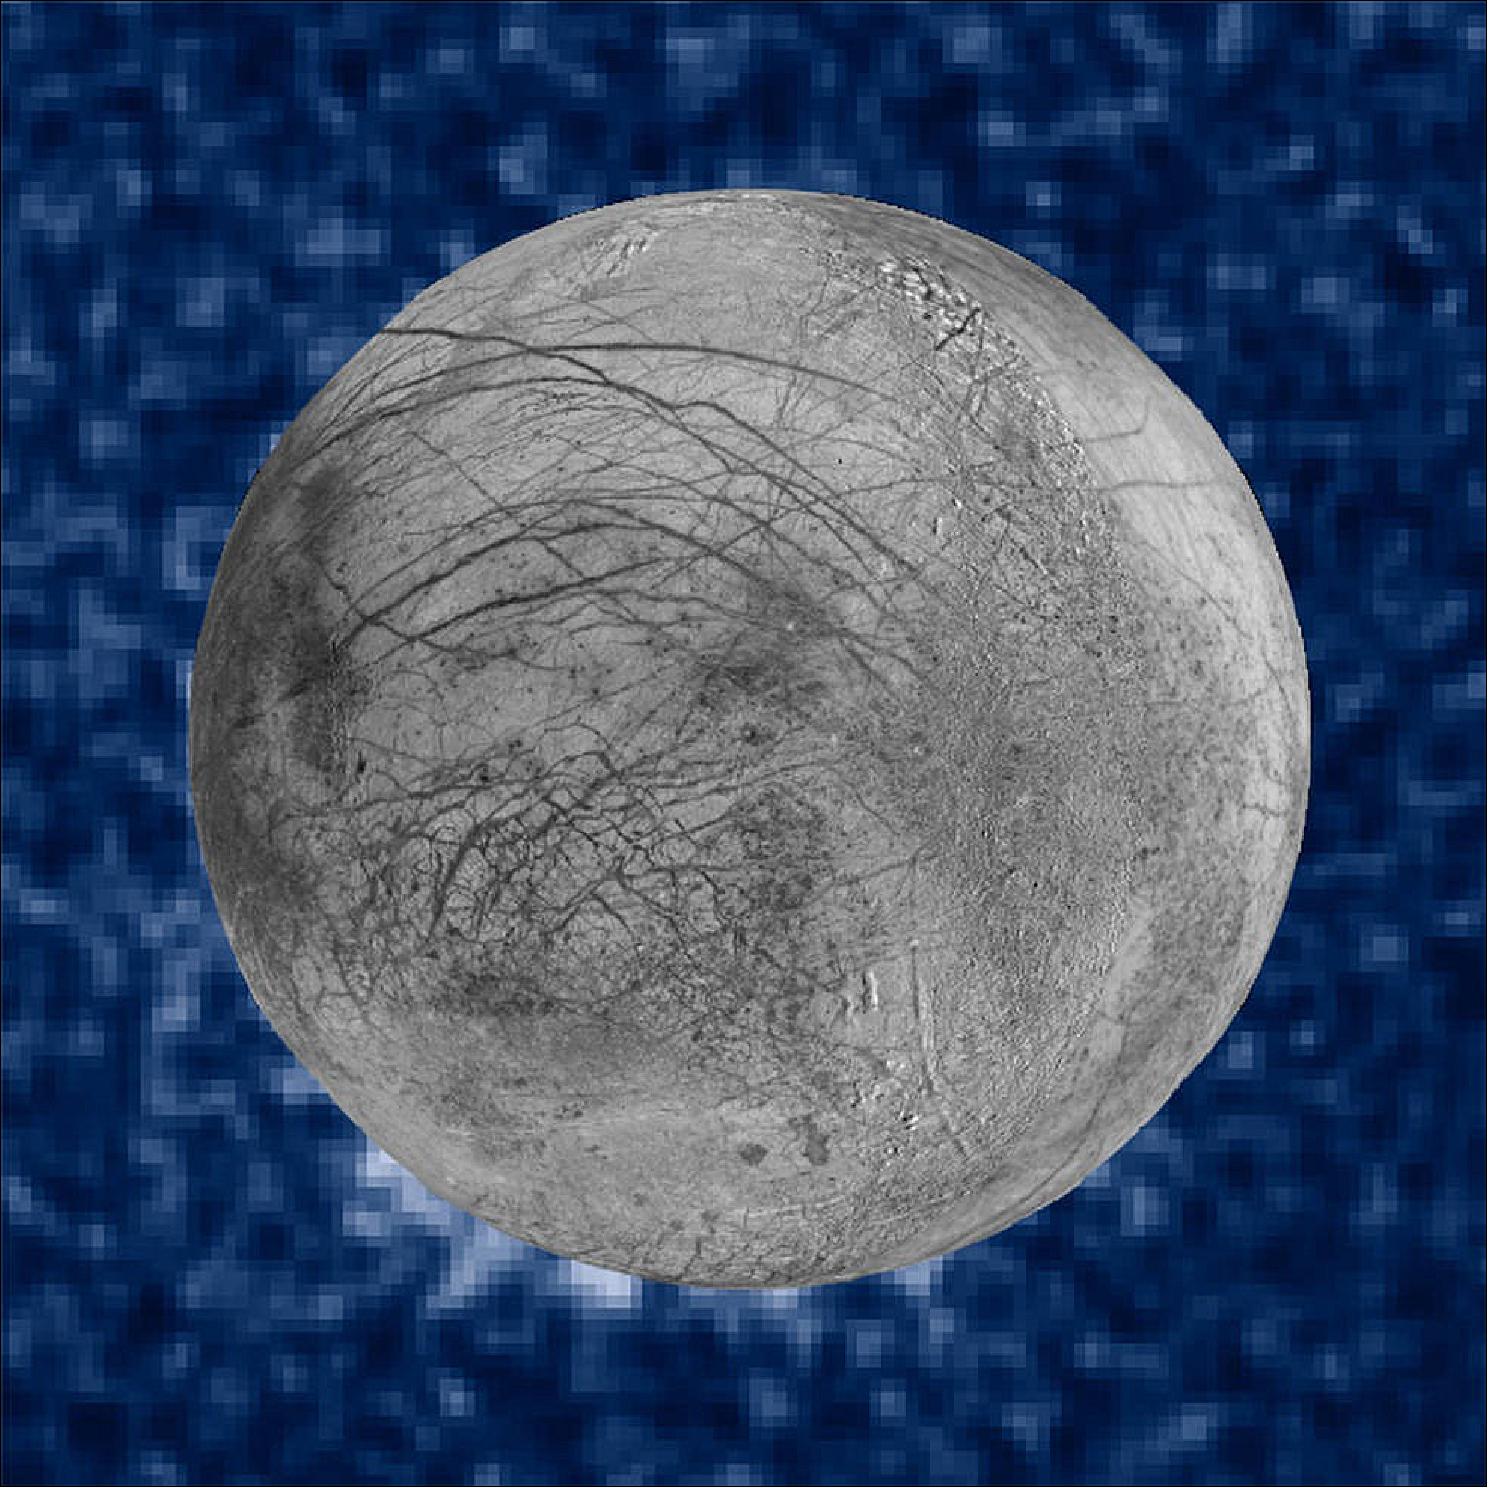 Figure 14: This composite image shows suspected plumes of water vapor erupting at the 7 o'clock position off the limb of Jupiter's moon Europa. The plumes, photographed by NASA's Hubble Space Telescope Imaging Spectrograph, were seen in silhouette as the moon passed in front of Jupiter. The Hubble data were gathered on January 26, 2014. The image of Europa, superimposed on the Hubble data, is assembled from data from the Galileo and Voyager missions (image credits: NASA/ESA/W. Sparks (STScI)/USGS Astrogeology Science Center)